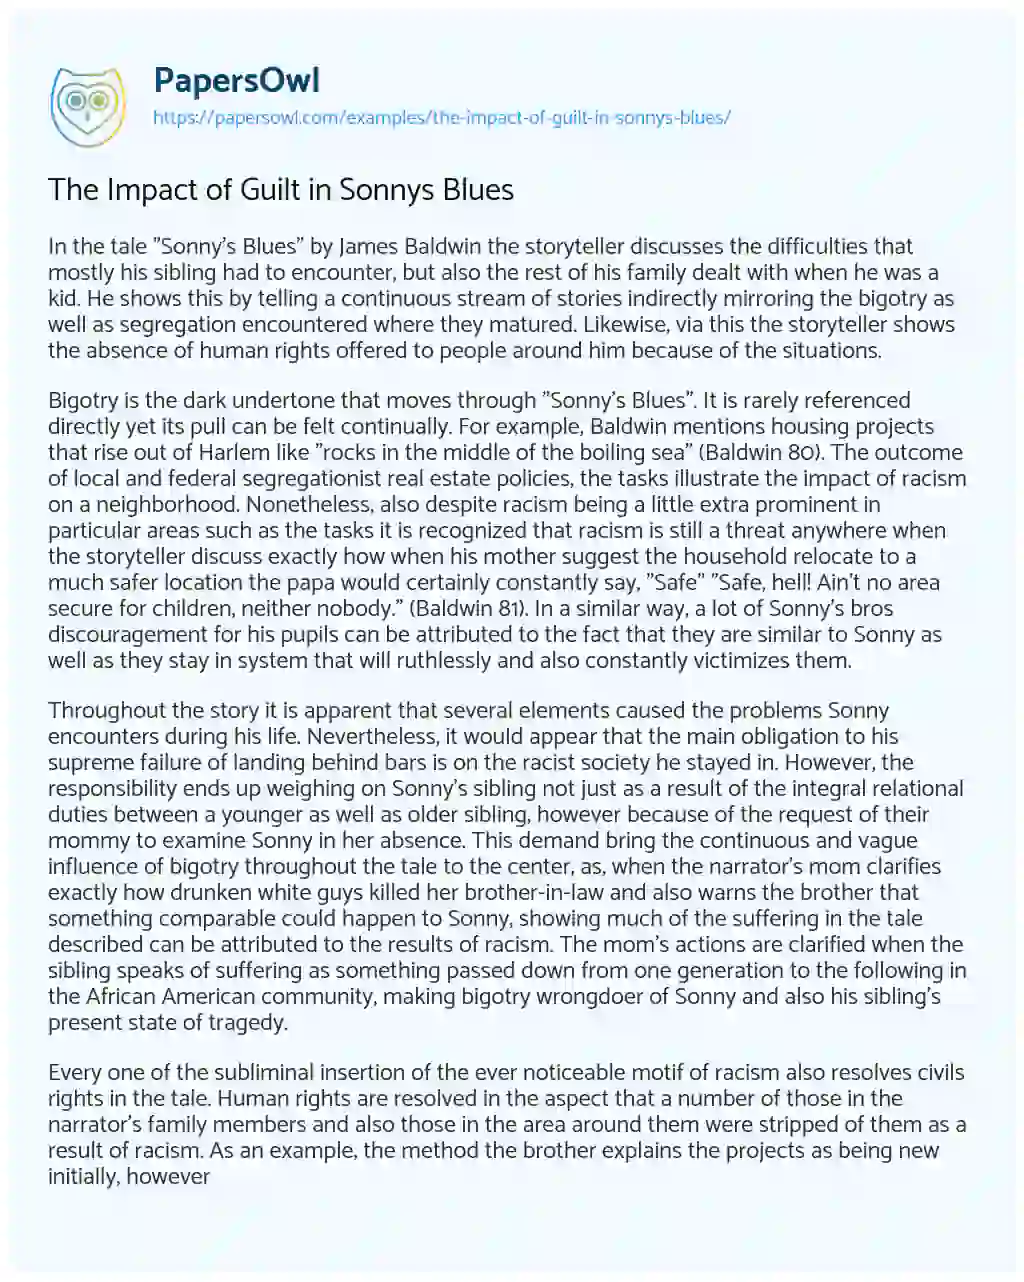 Essay on The Impact of Guilt in Sonnys Blues